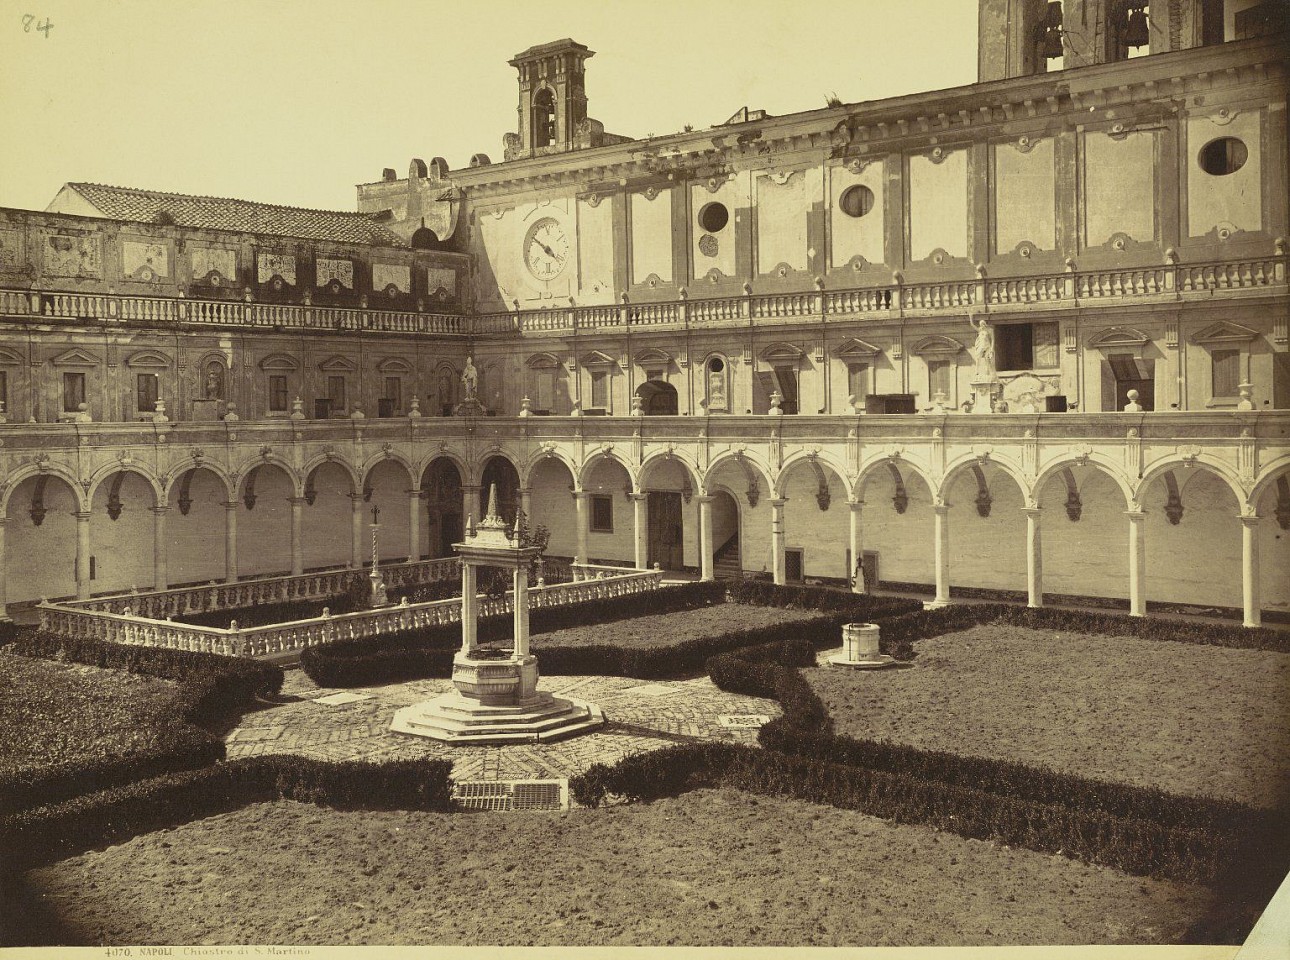 Giorgio SOMMER, Chiostro di S. Martino (Cloister of the Monastery of S. Martino), c. 1860s
Vintage albumen print from collodion negative, 11 x 14 3/4 in.
2019.03.132
ADDITIONAL INFORMATION: Title correction by Lafayette College faculty Diane Ahl, Arthur J. '55 & Barbara S. Rothkopf Professor of Art History, Ph.D.
Credit Line: Lafayette College Art Collection, Easton, PA; Gift of Bennett ('79) and Meg Goodman